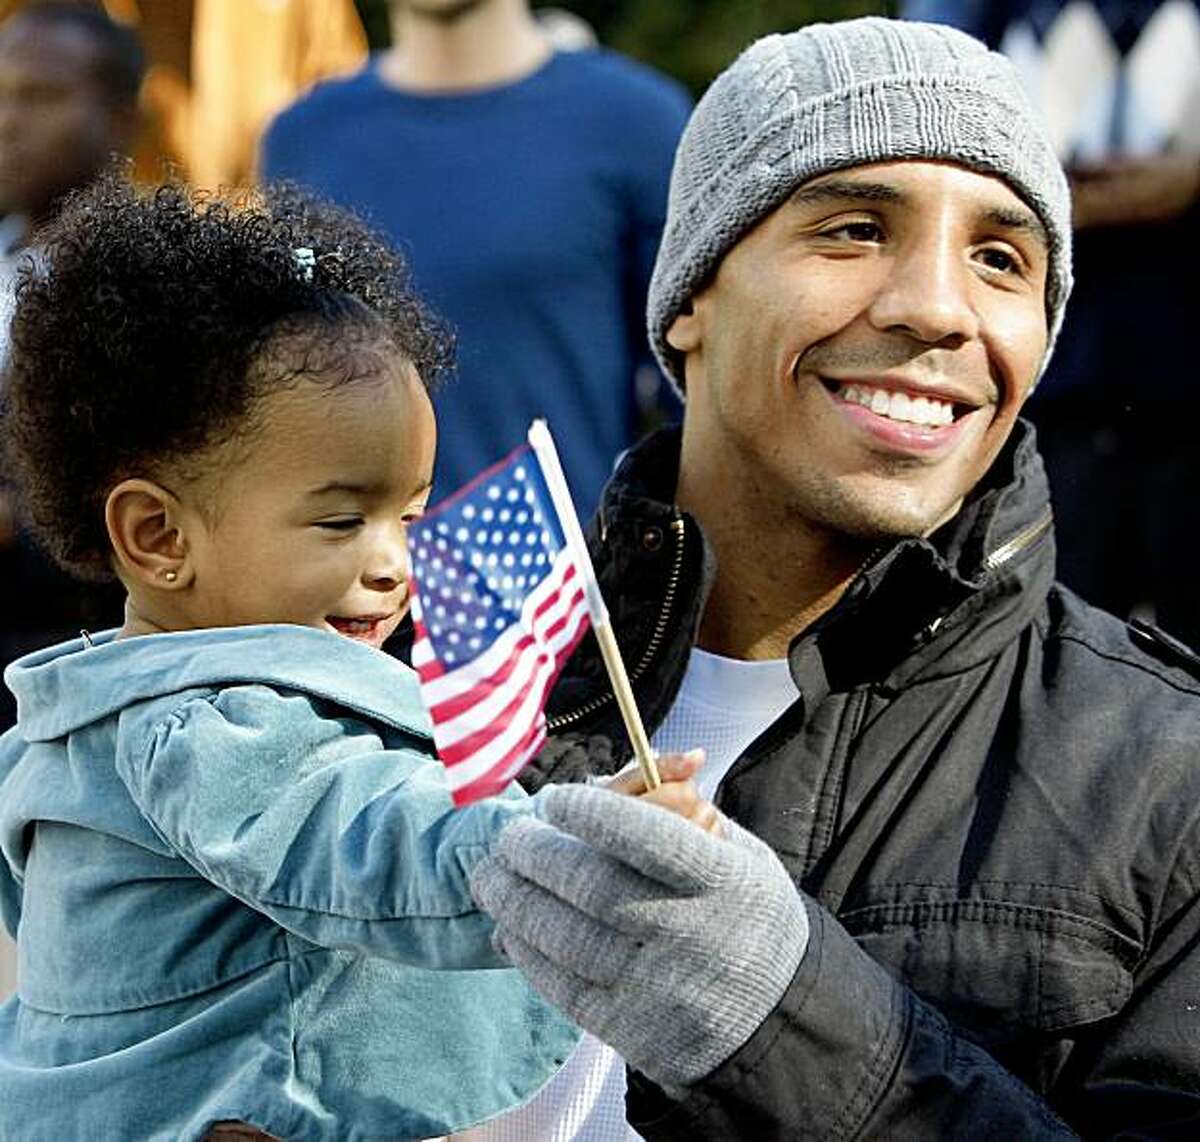 Andre Ward holds his daughter Amira Ward prior to a news conference Wednesday, Nov. 18, 2009, in Oakland, Calif. Ward is scheduled to face Mikkel Kessler, of Denmark, for the WBA super middleweight championship during the Super Six World Boxing Classic on Saturday in Oakland. (AP Photo/Ben Margot)